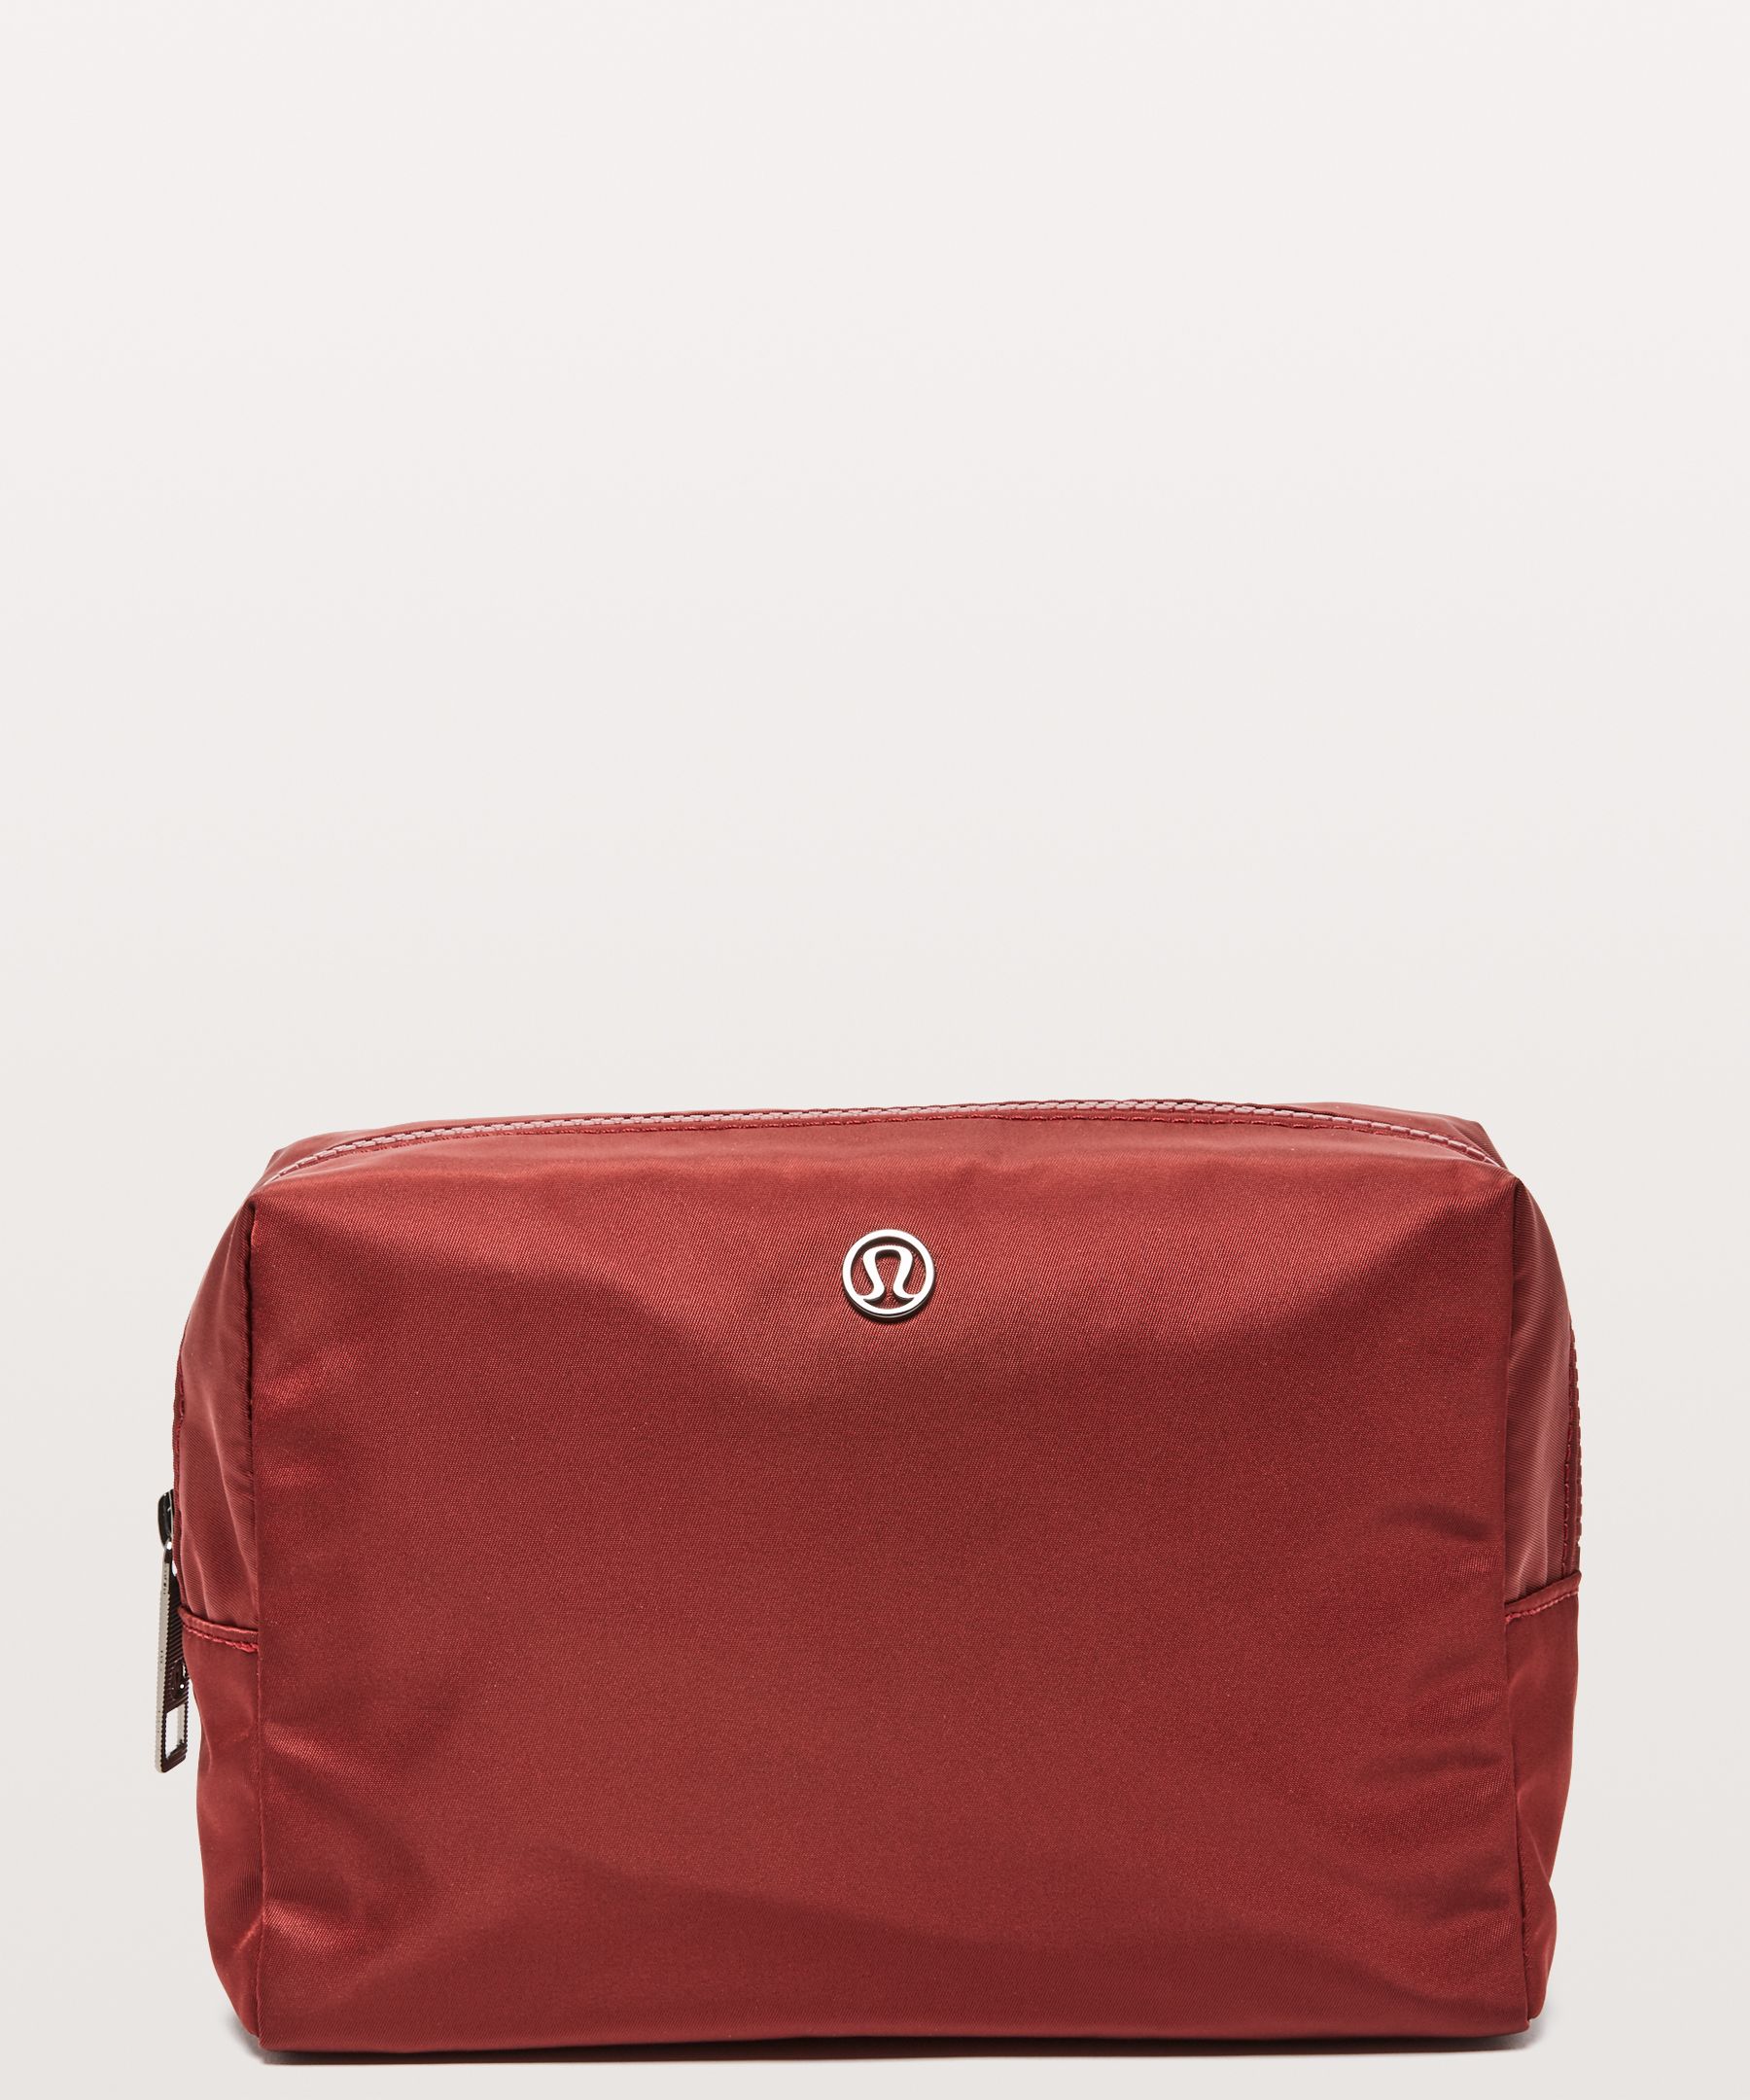 Lululemon All Your Small Things Pouch In Burgundy